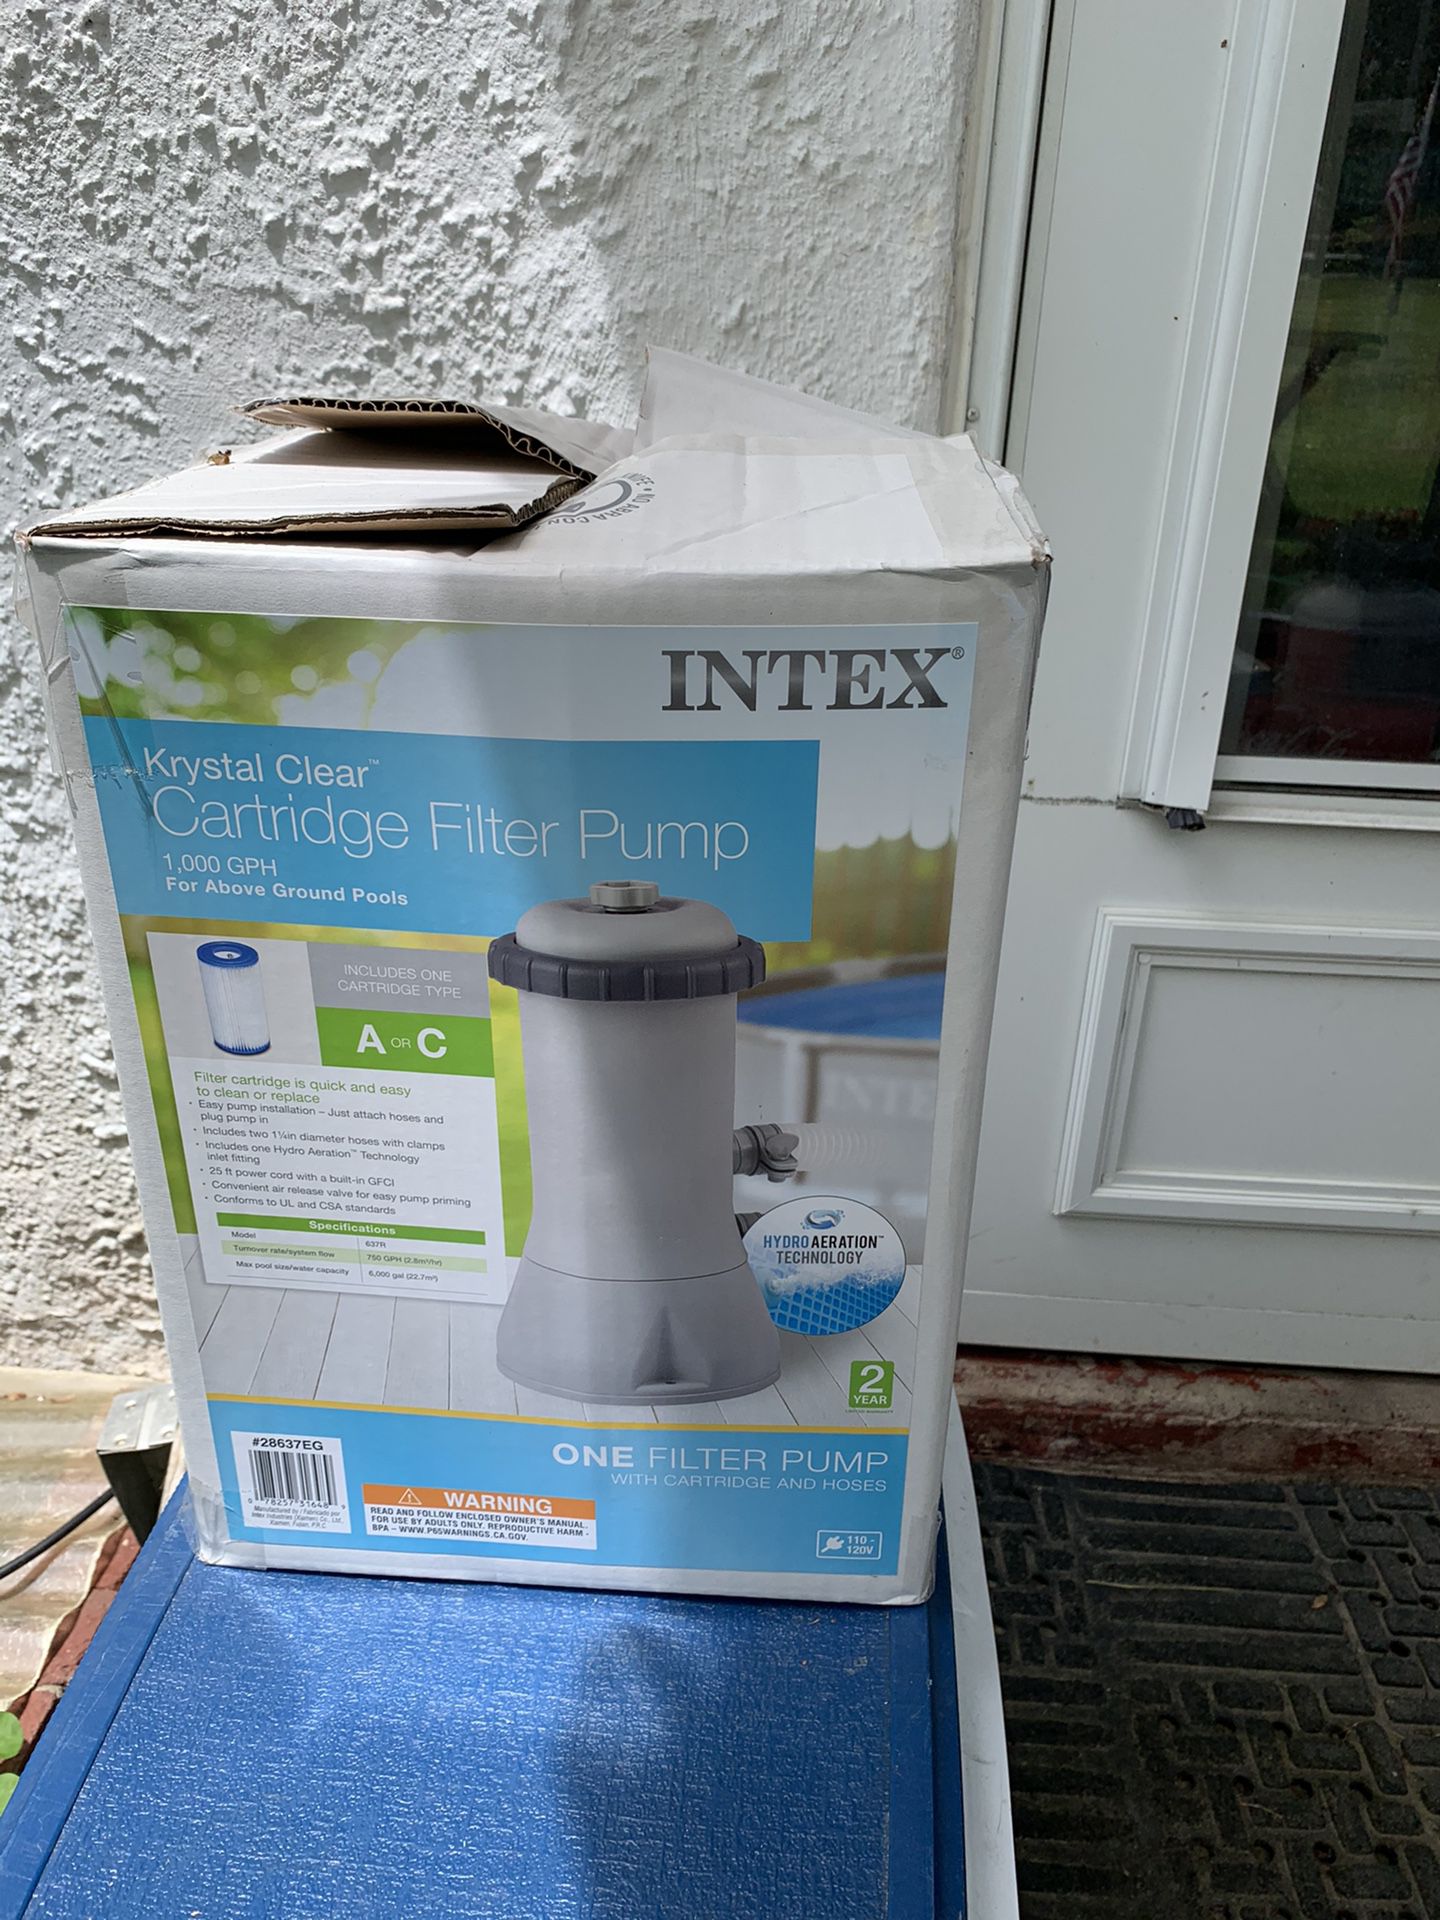 Intex krystal clear cartridge pump never used set up but not used brand new.